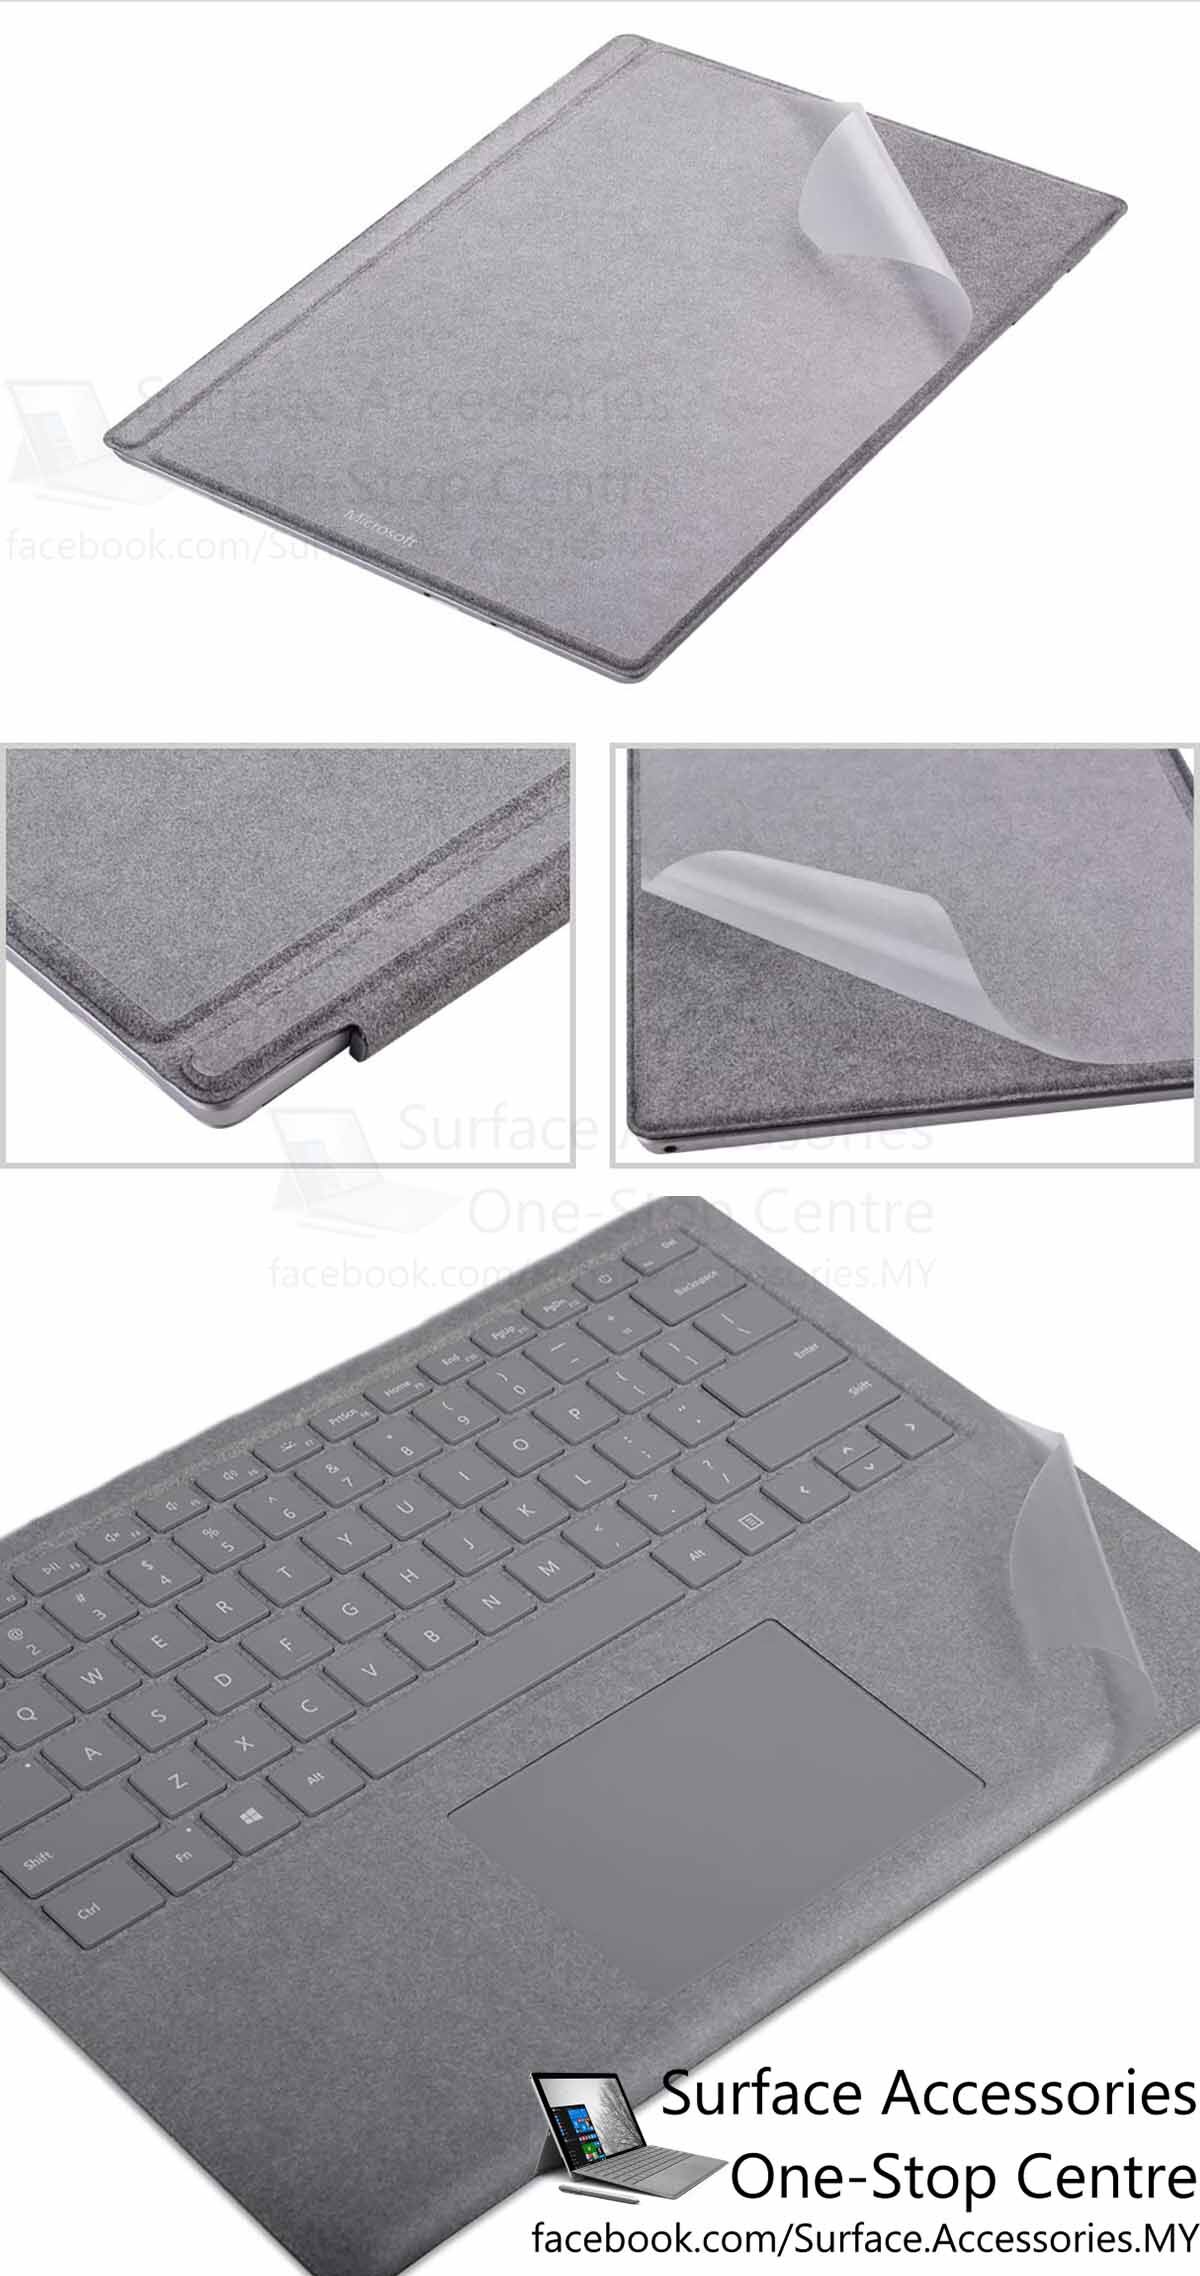 [MALAYSIA]Microsoft Surface Pro 8 Surface Pro 7+ Pro 7 Pro 6 Surface Pro 5 Surface Pro 4 Surface Go 3 Go 2 Surface Pro X Surface Go Surface Laptop 4 Surface Laptop 3 Surface Laptop 2 TypeCover Skin Keyboard Skin Keyboard Protector Palm Rest Protector